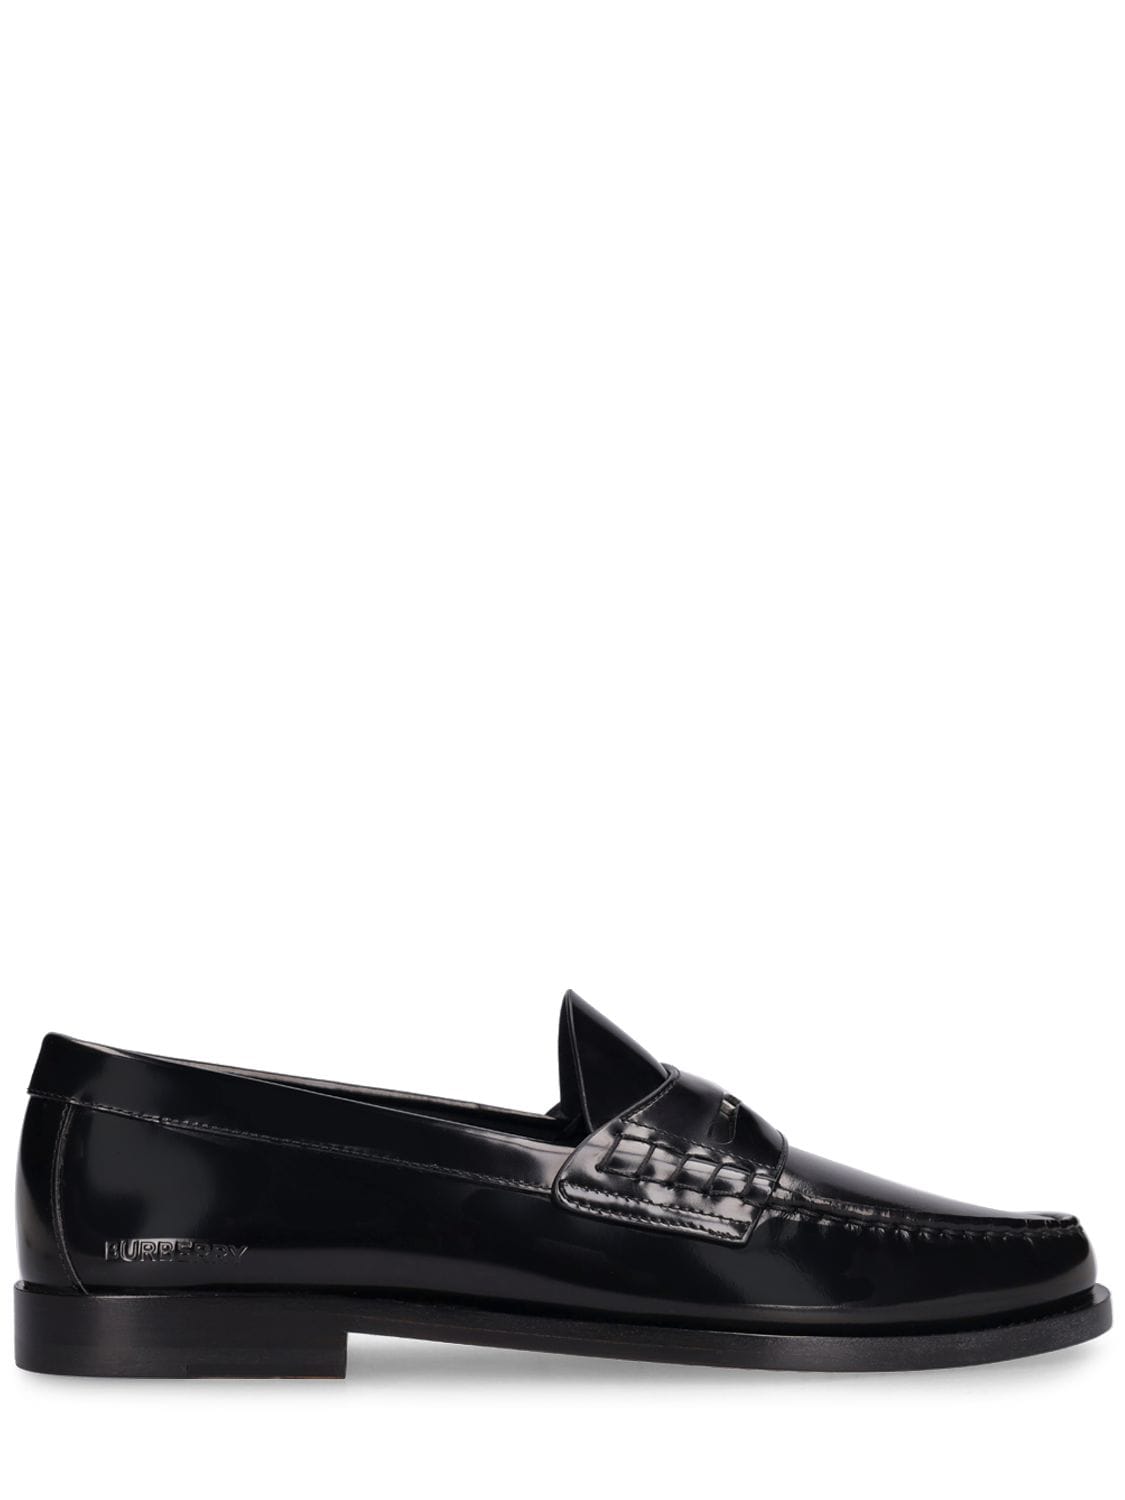 BURBERRY 10MM RUPERT LEATHER LOAFERS